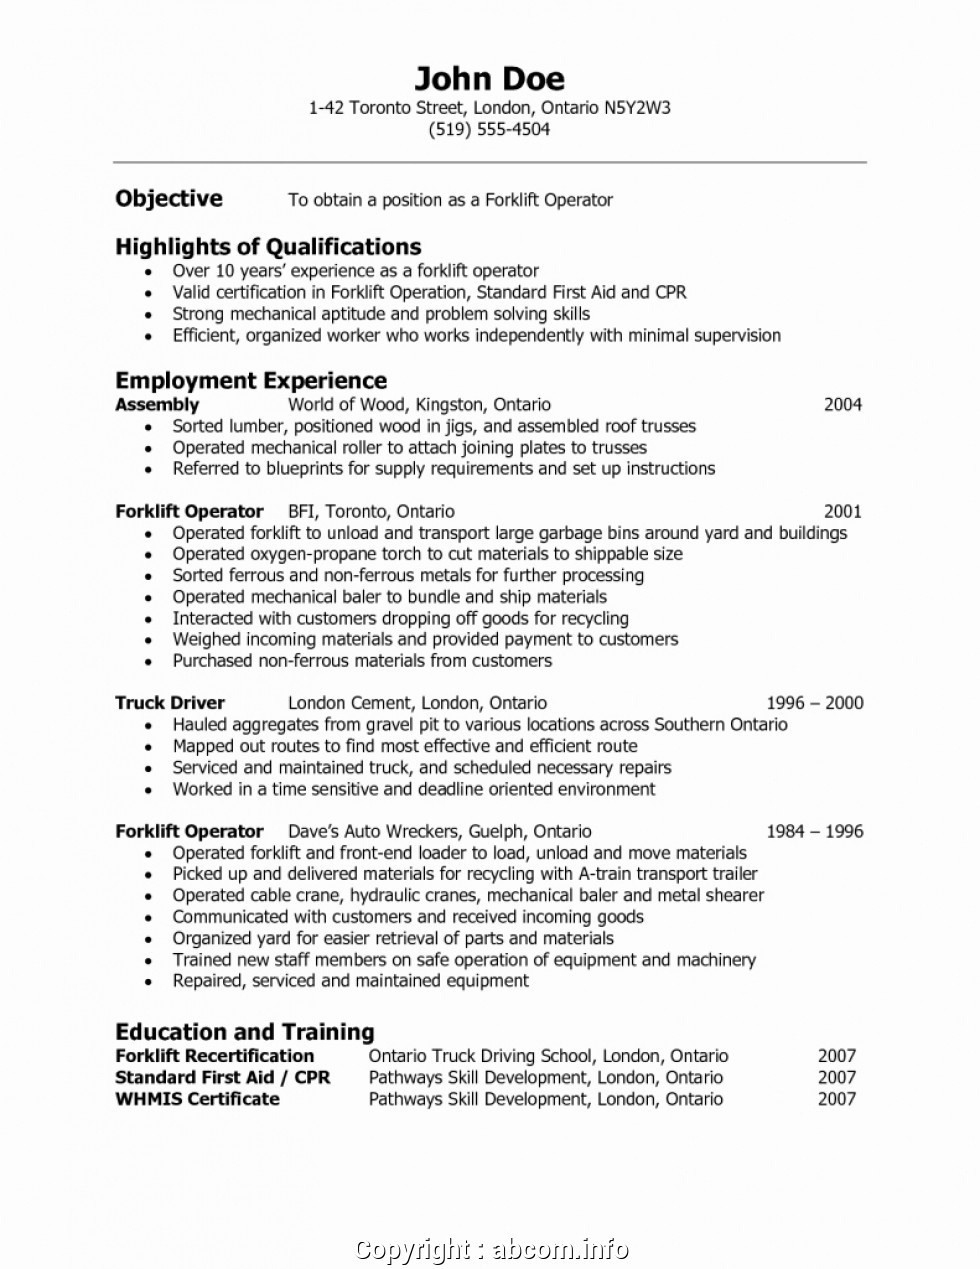 Sample Resume Objective for Warehouse Worker Essay Project Officer social organizer Warehouse assistant Others …